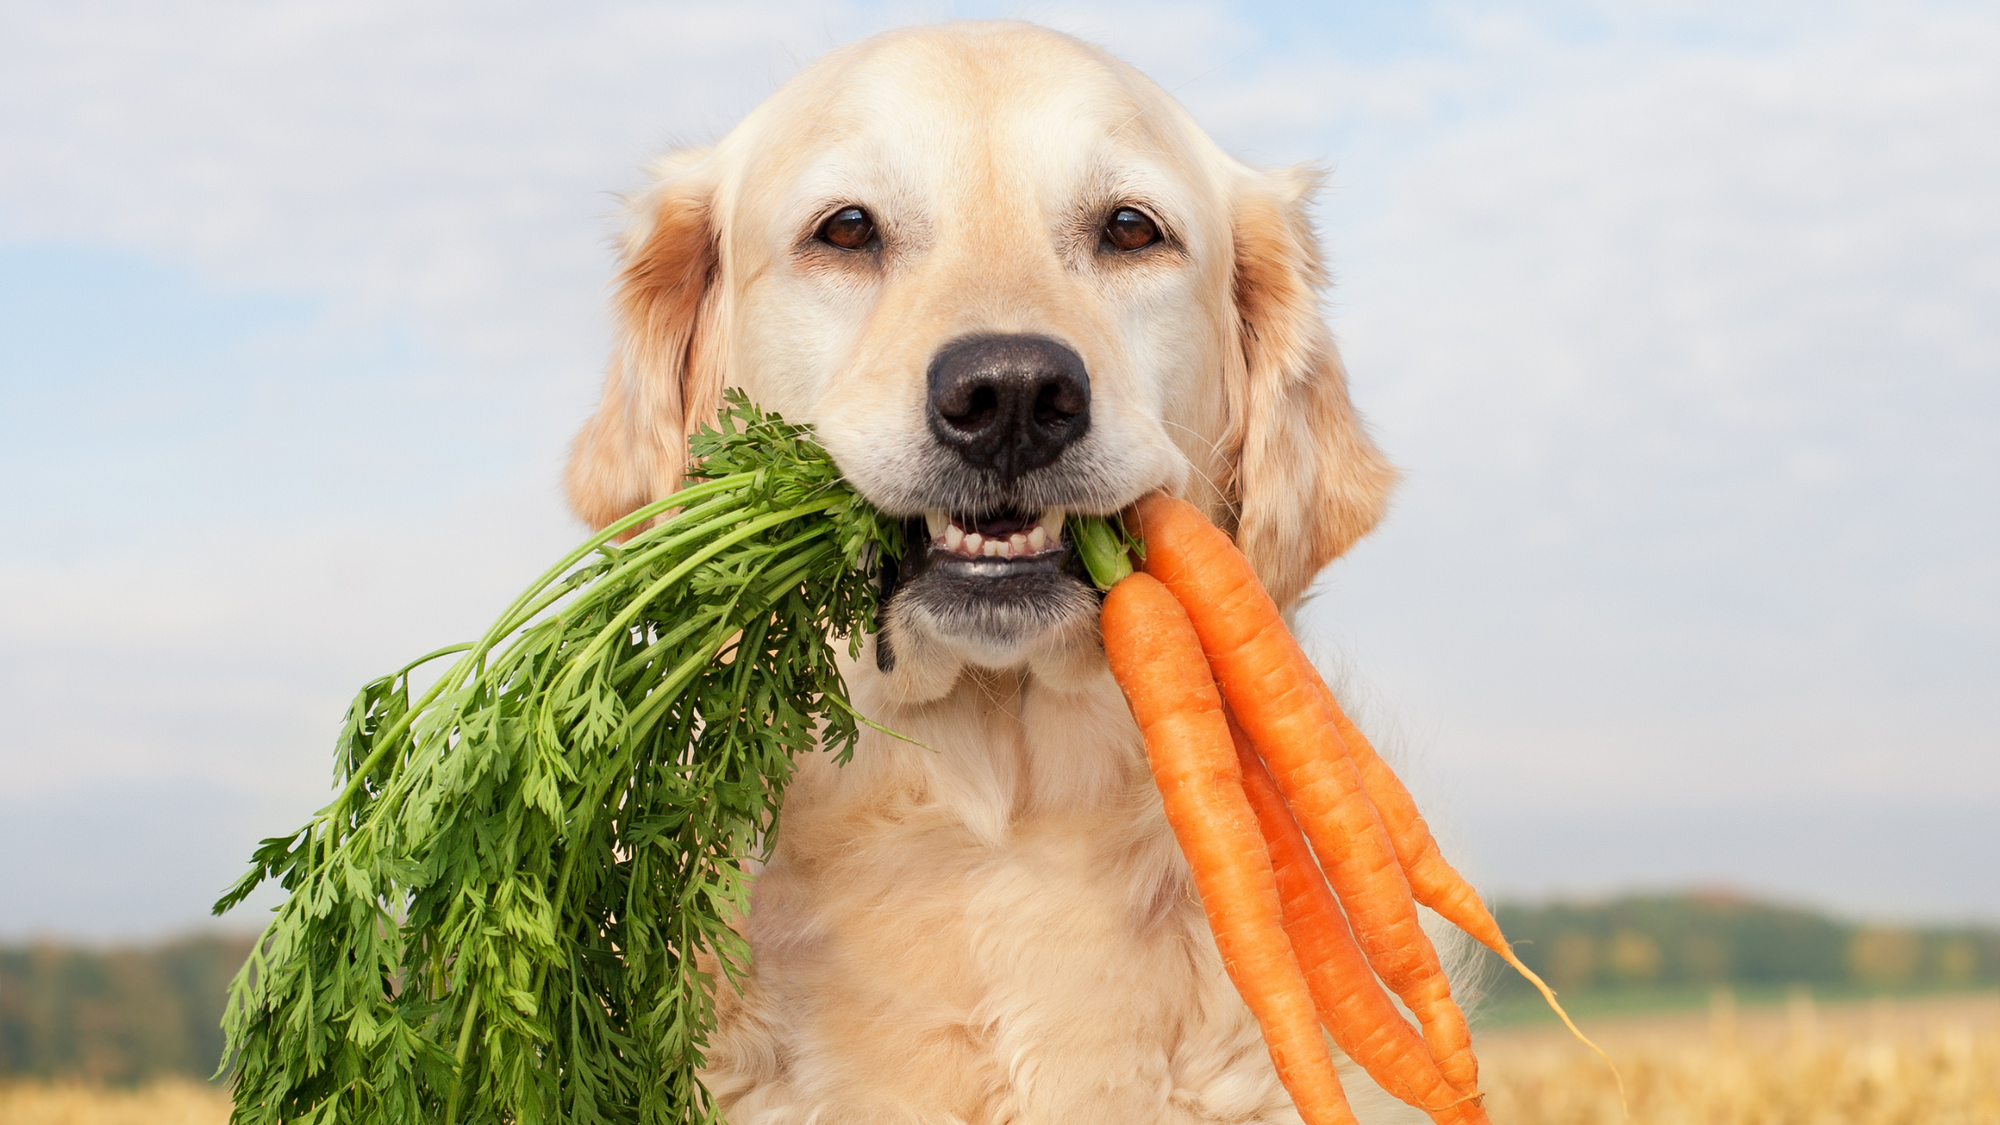 golden retriever holding carrots in mouth